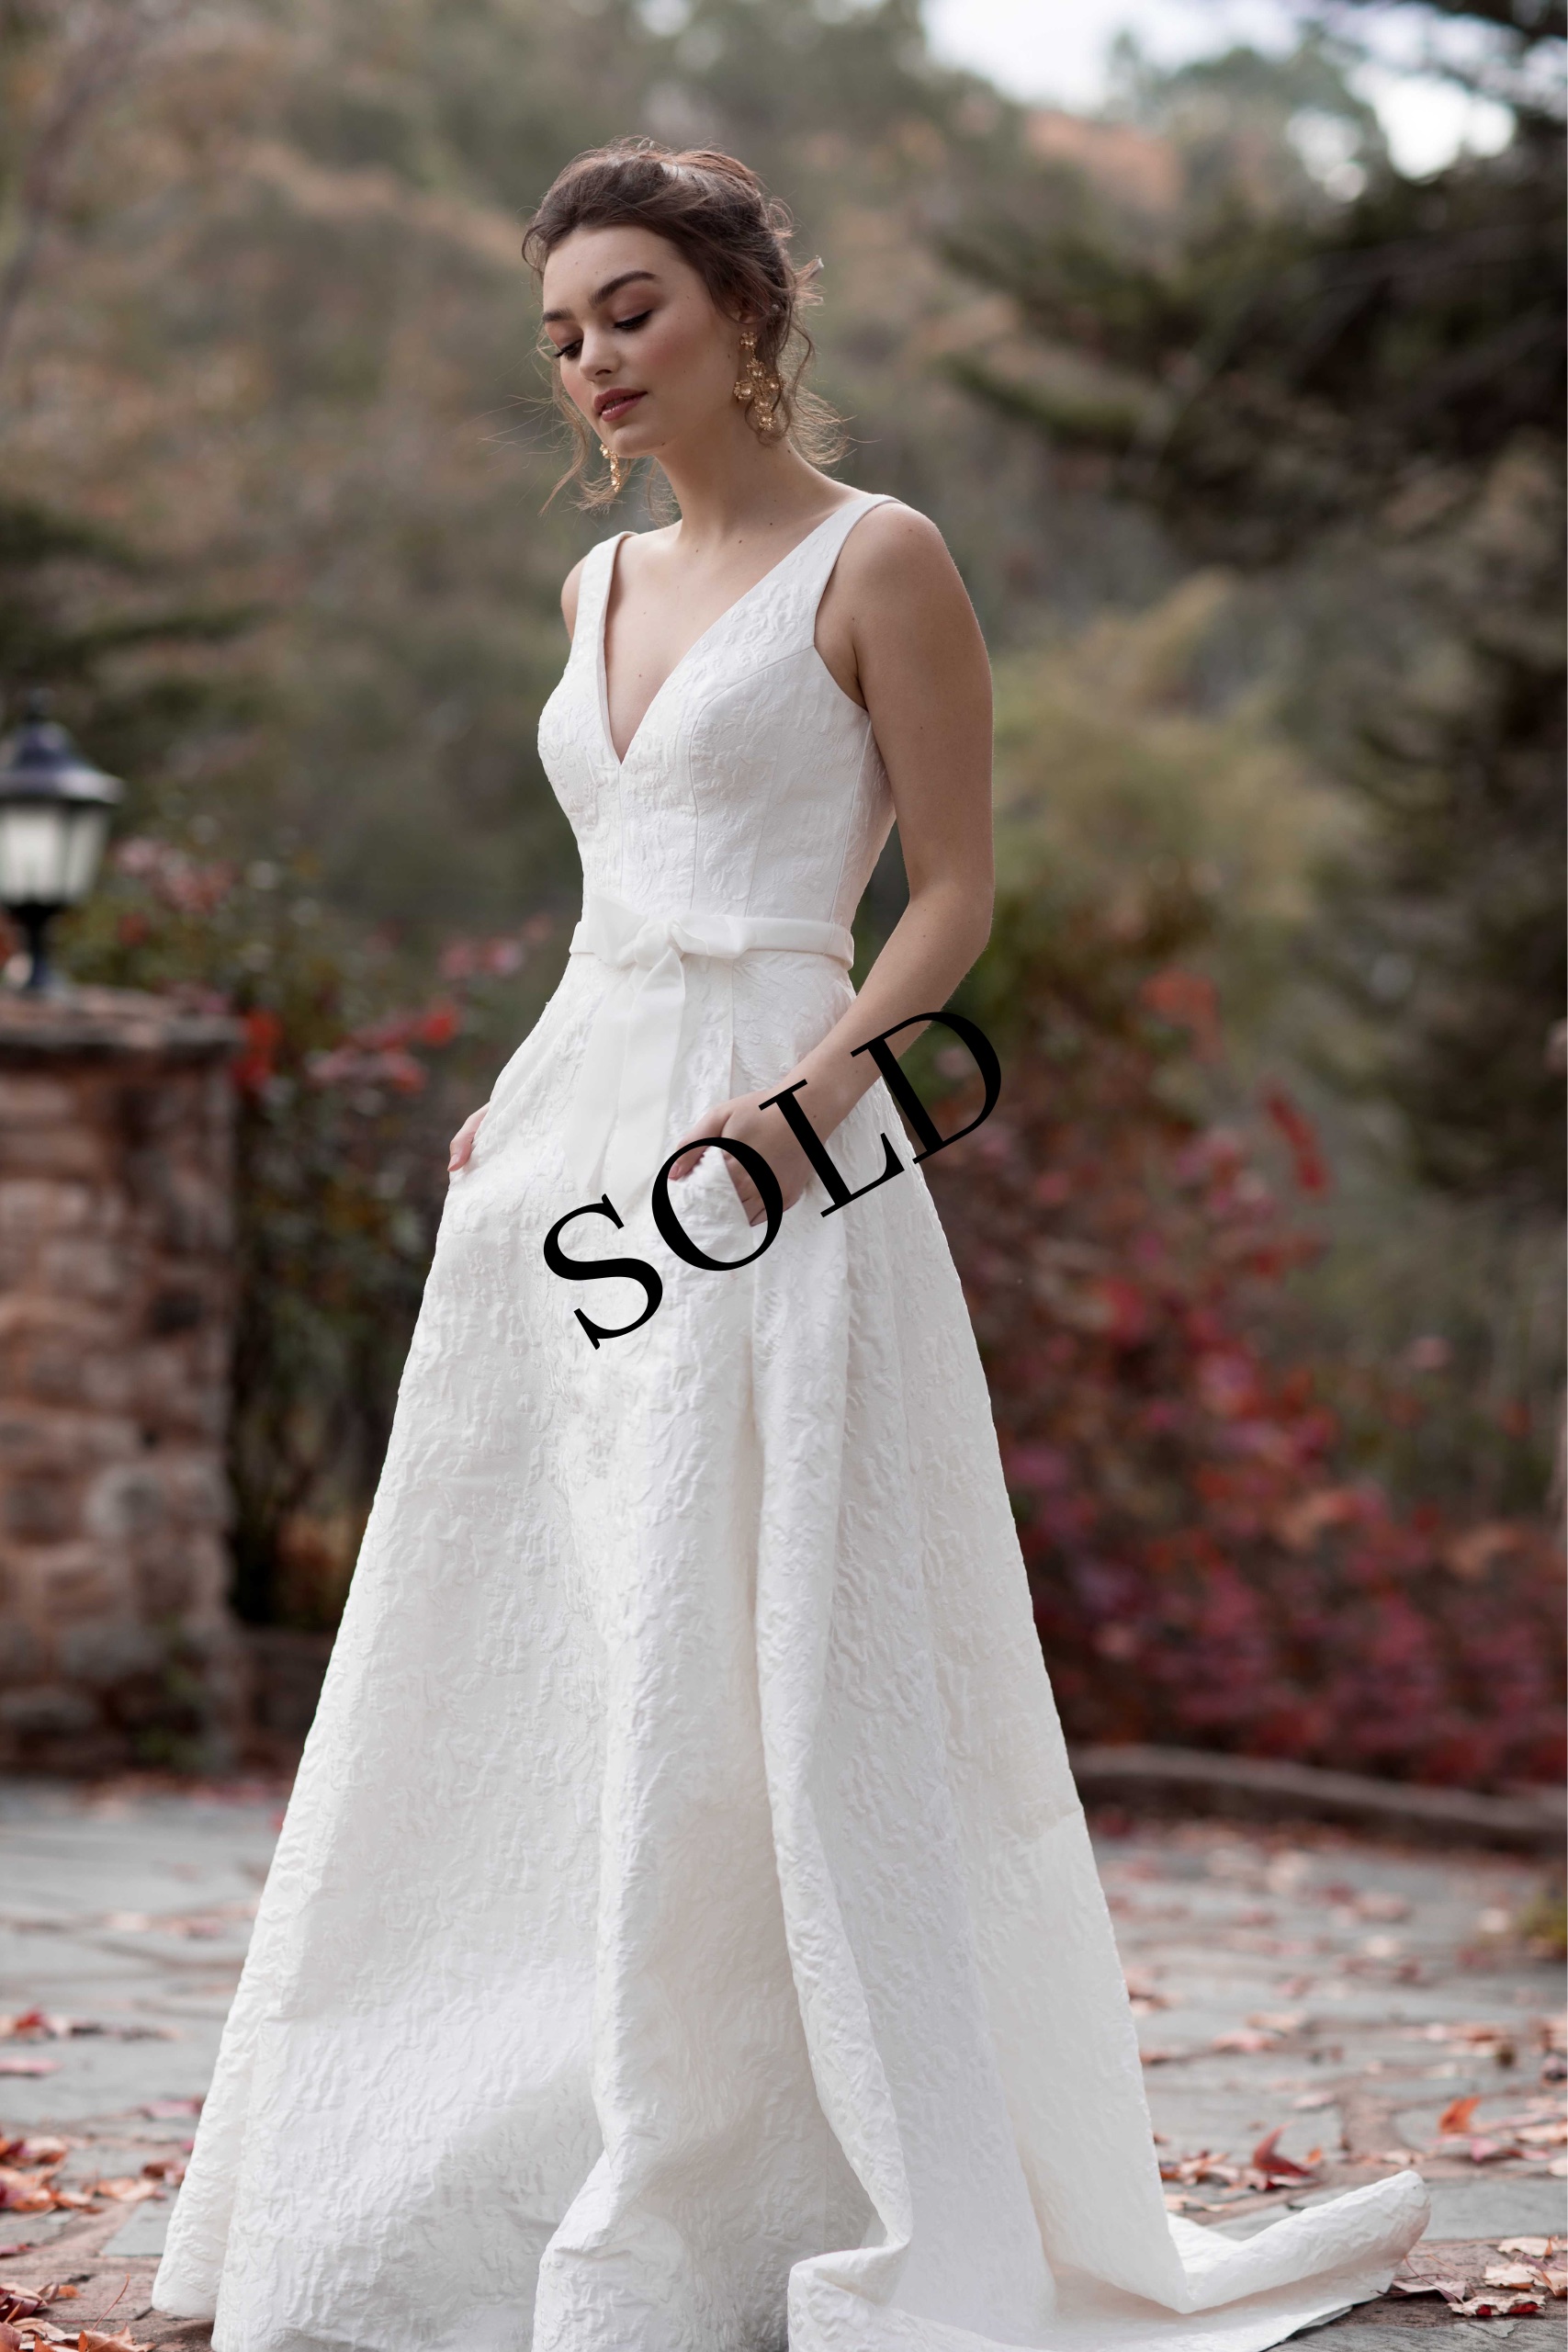 The Opera sample gown is sold.